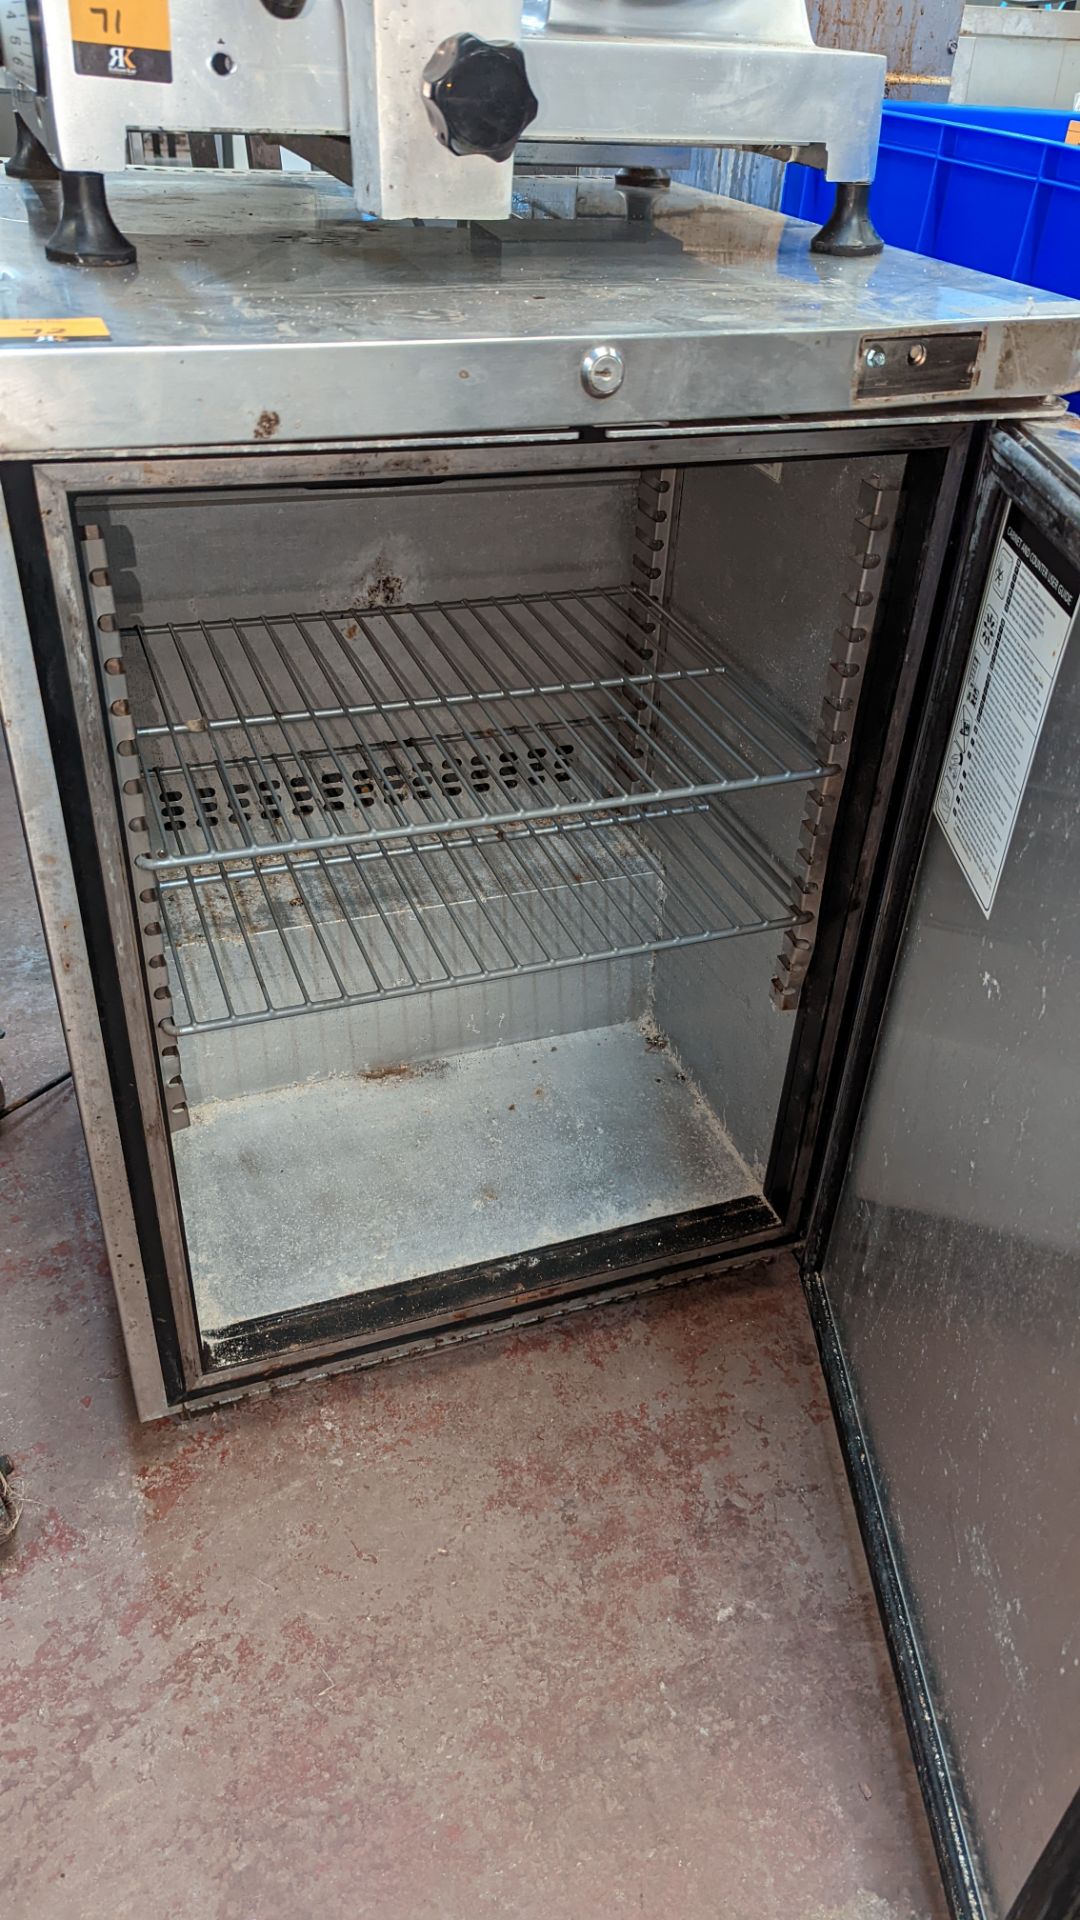 Foster stainless steel under counter fridge model HR150-A - Image 3 of 5